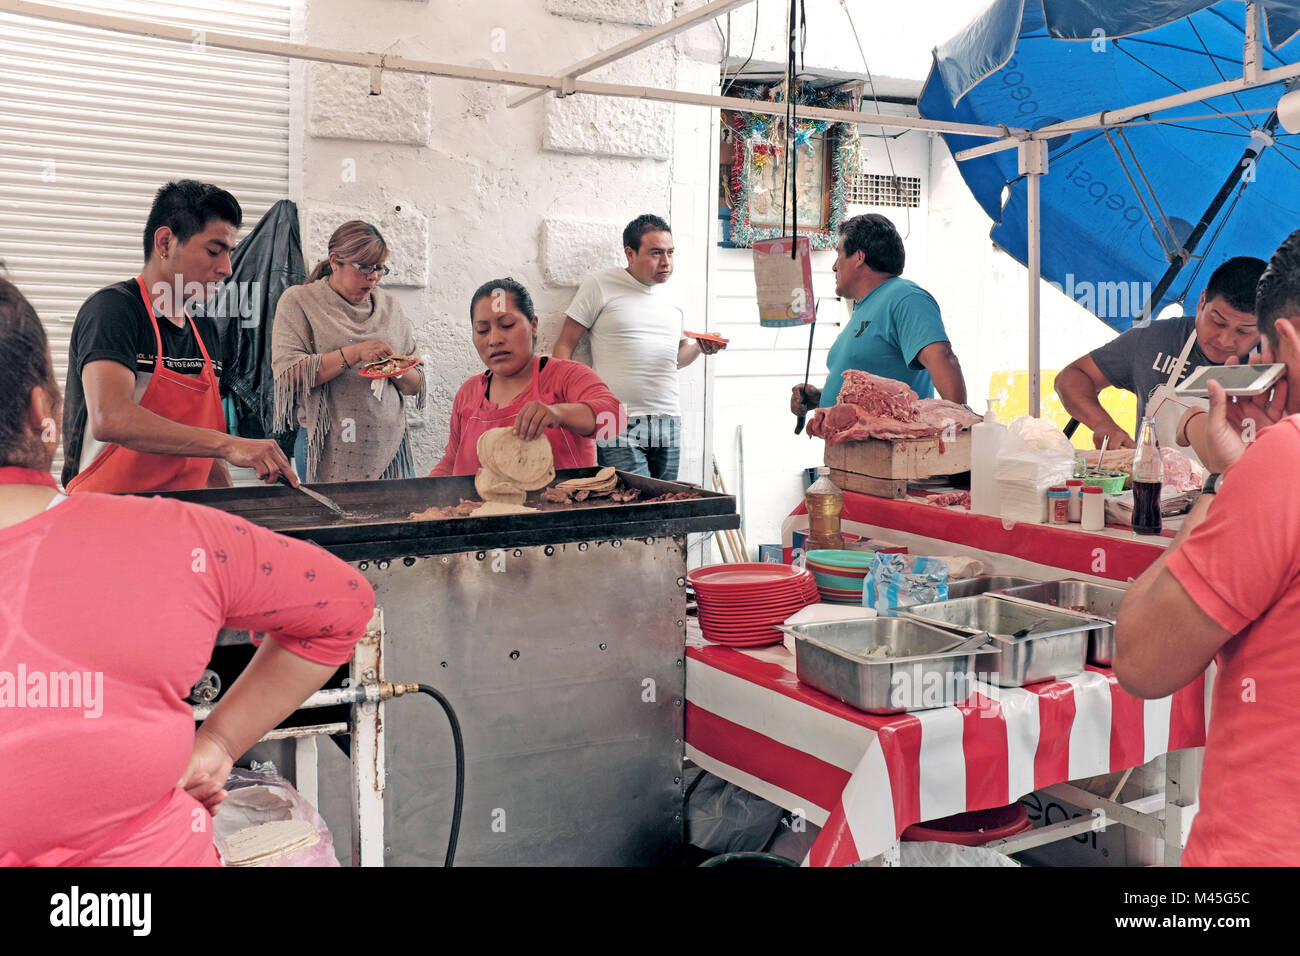 A street food stand in Mexico City, Mexico shows unsanitary conditions with raw meat and food sitting out and workers not using gloves while cooking Stock Photo